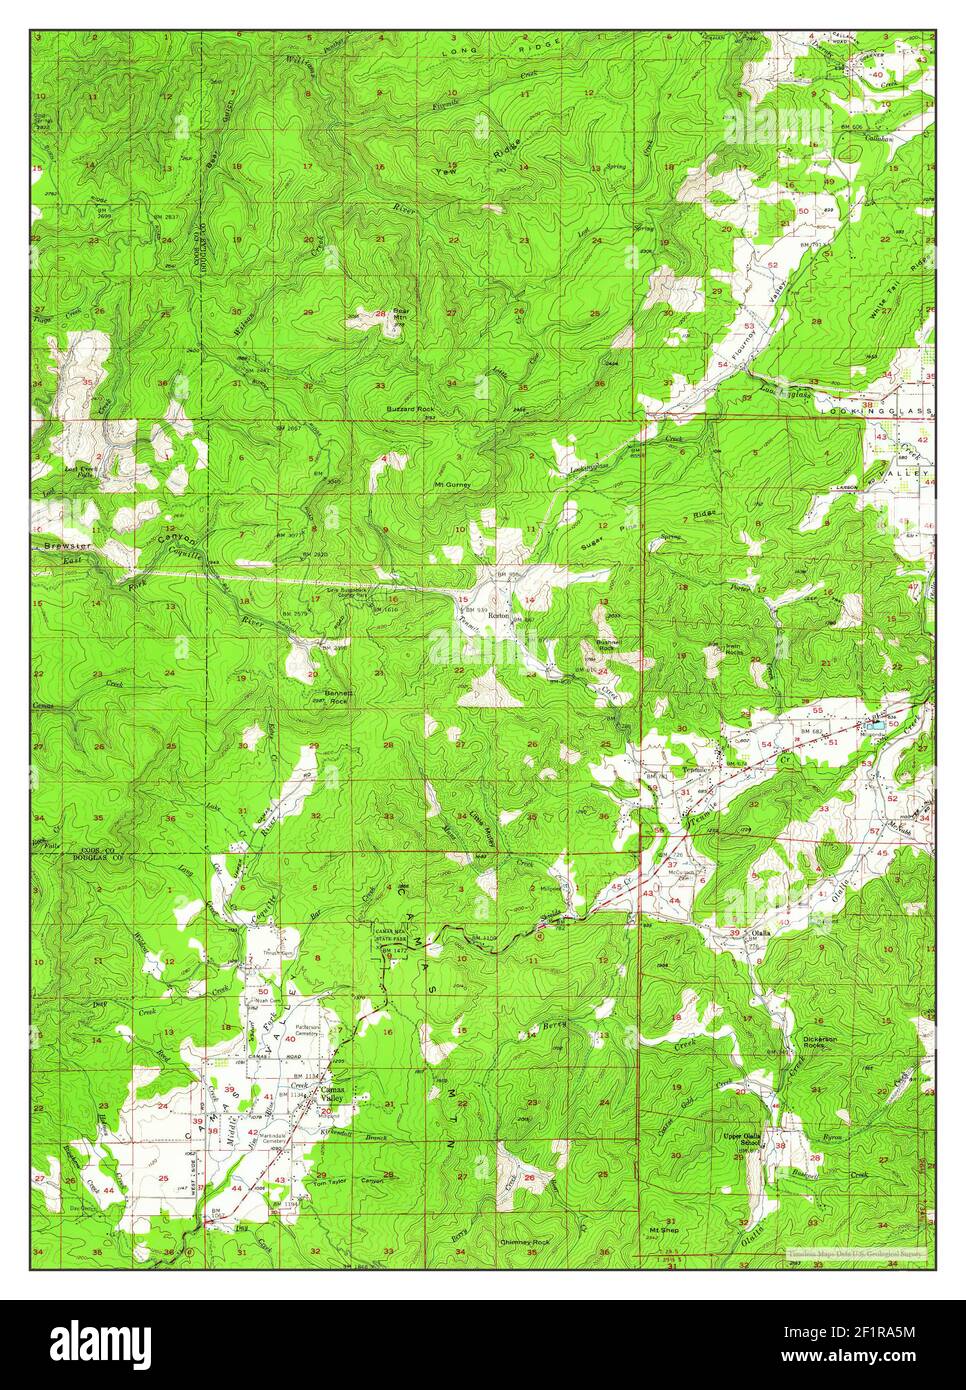 Camas Valley, Oregon, map 1955, 1:62500, United States of America by Timeless Maps, data U.S. Geological Survey Stock Photo